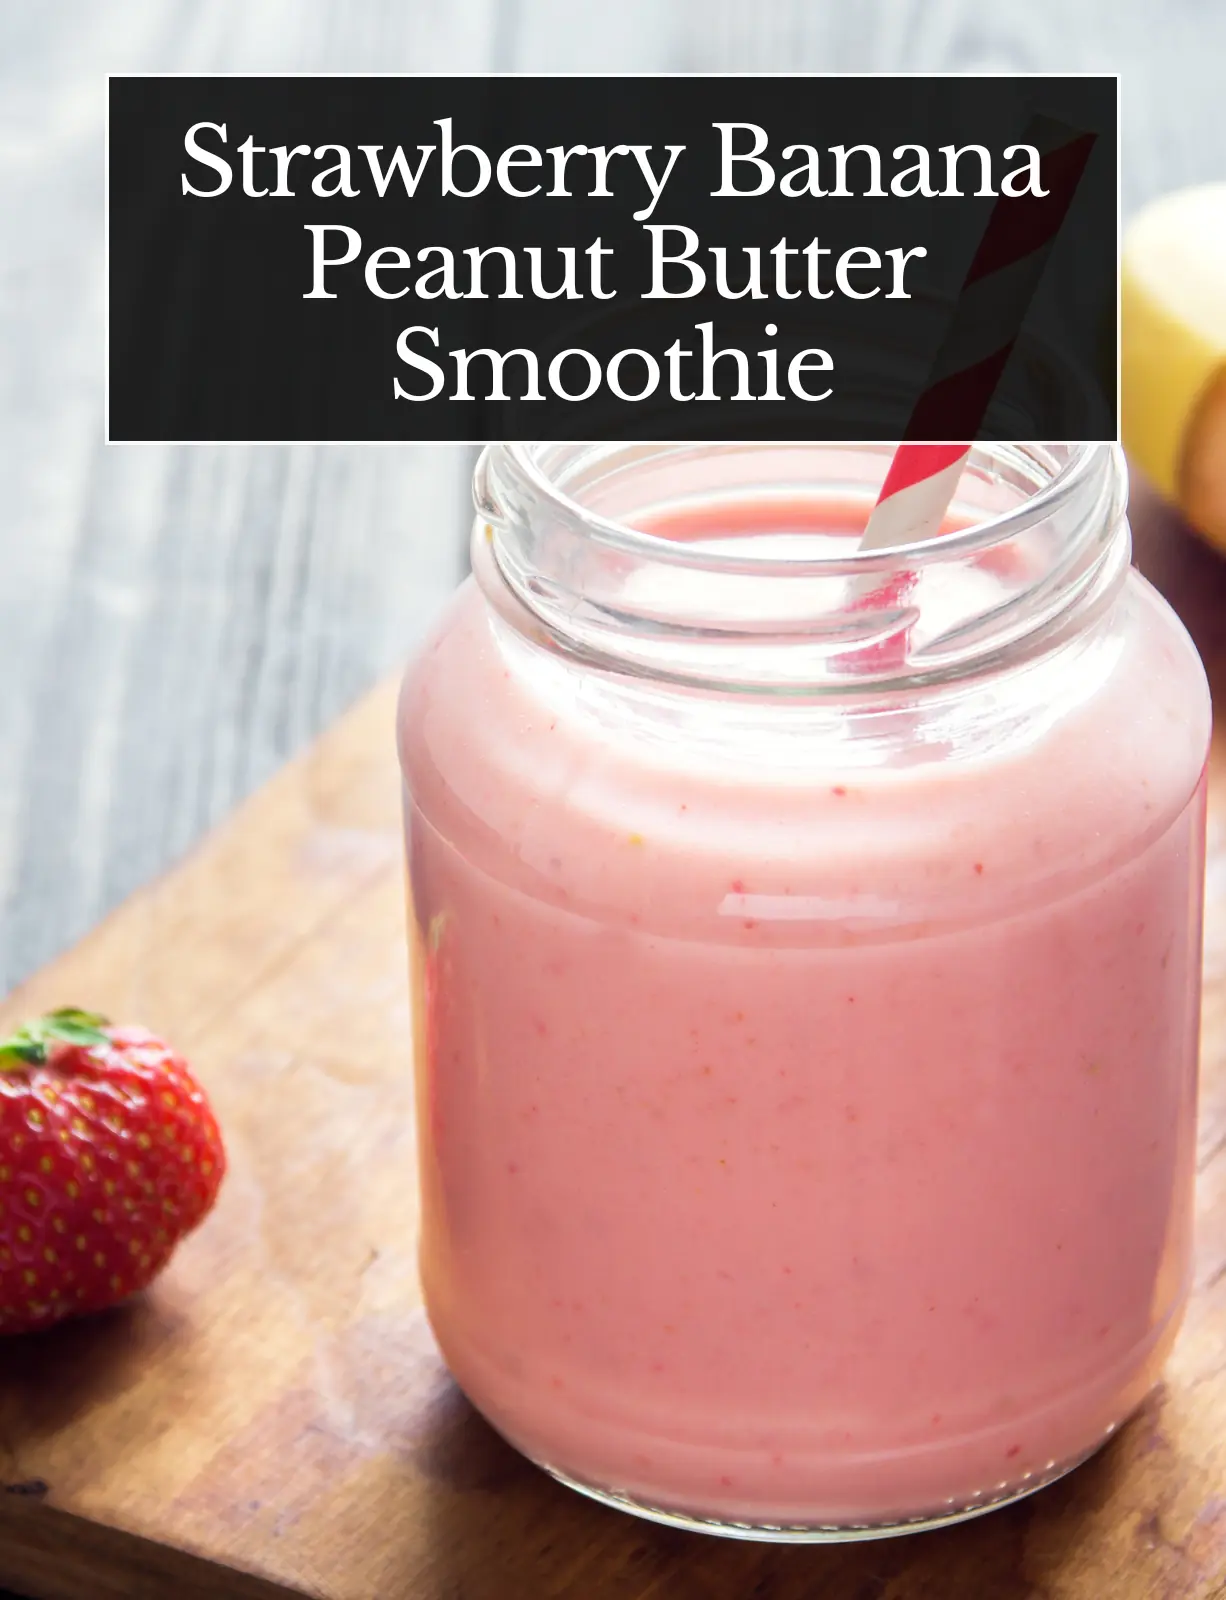 strawberry banana peanut butter smoothie, strawberry banana pb smoothie, how to make a strawberry banana peanut butter smoothie, strawberry banana smoothie with peanut butter, healthy breakfast smoothie, strawberry banana smoothie, yummy berry smoothie